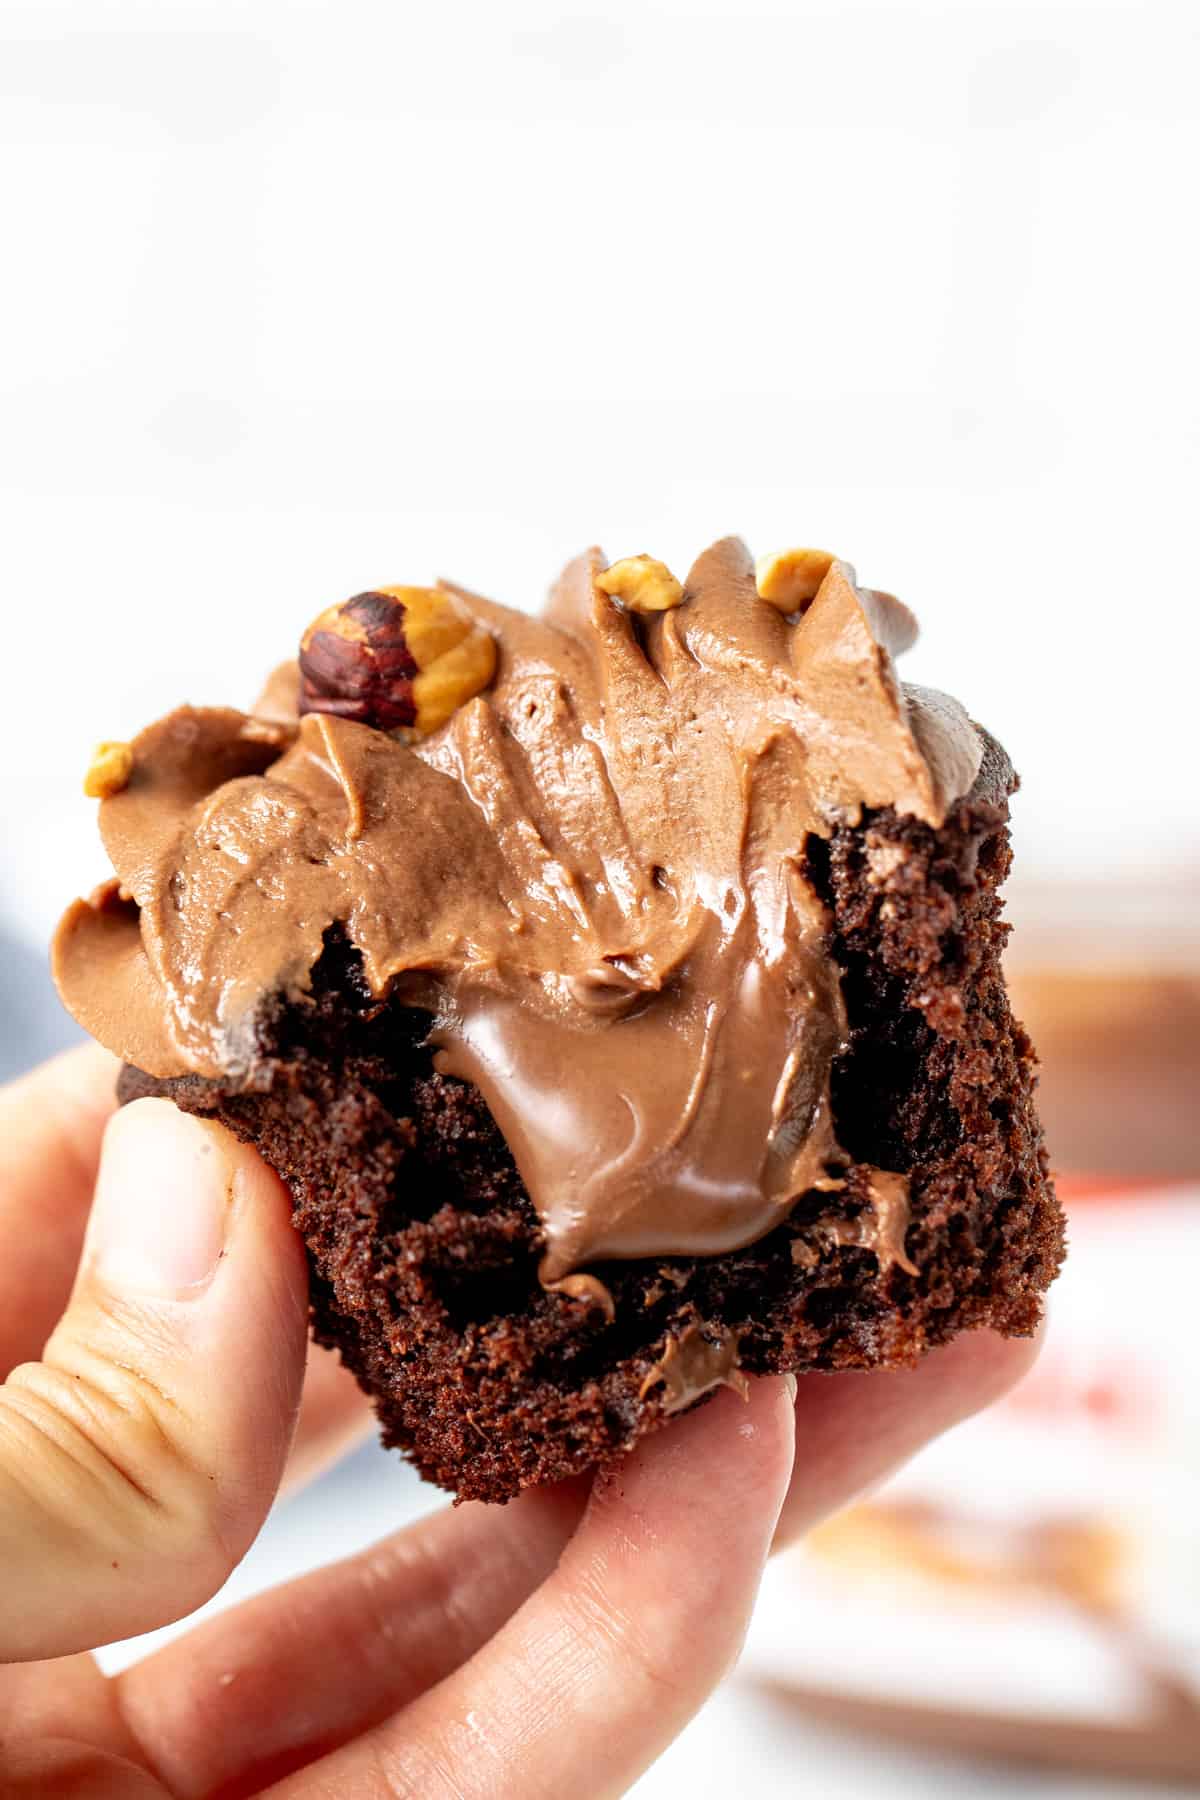 Nutella stuffed cupcake with a bite taken out